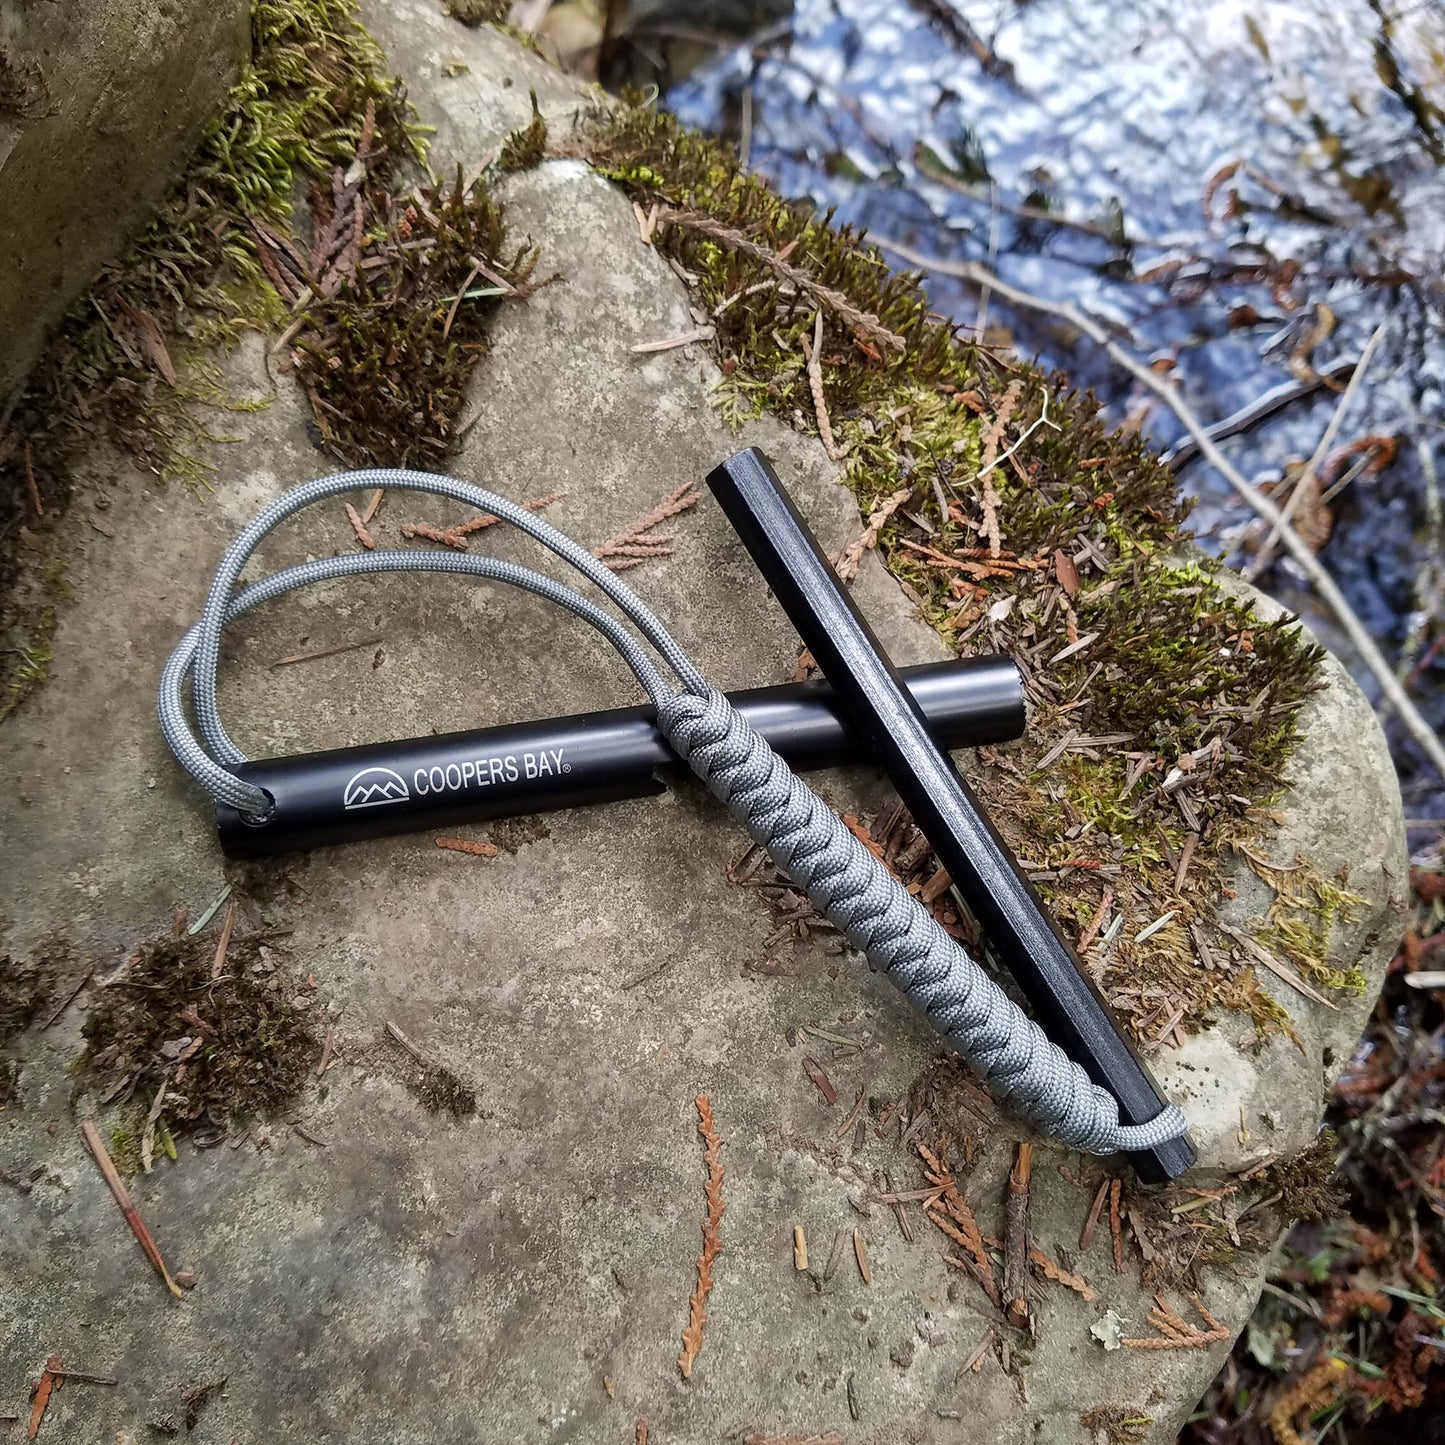 The PyroStryke Hexalite Ferro Rod fire starter for camping, hiking and emergency survival situations 